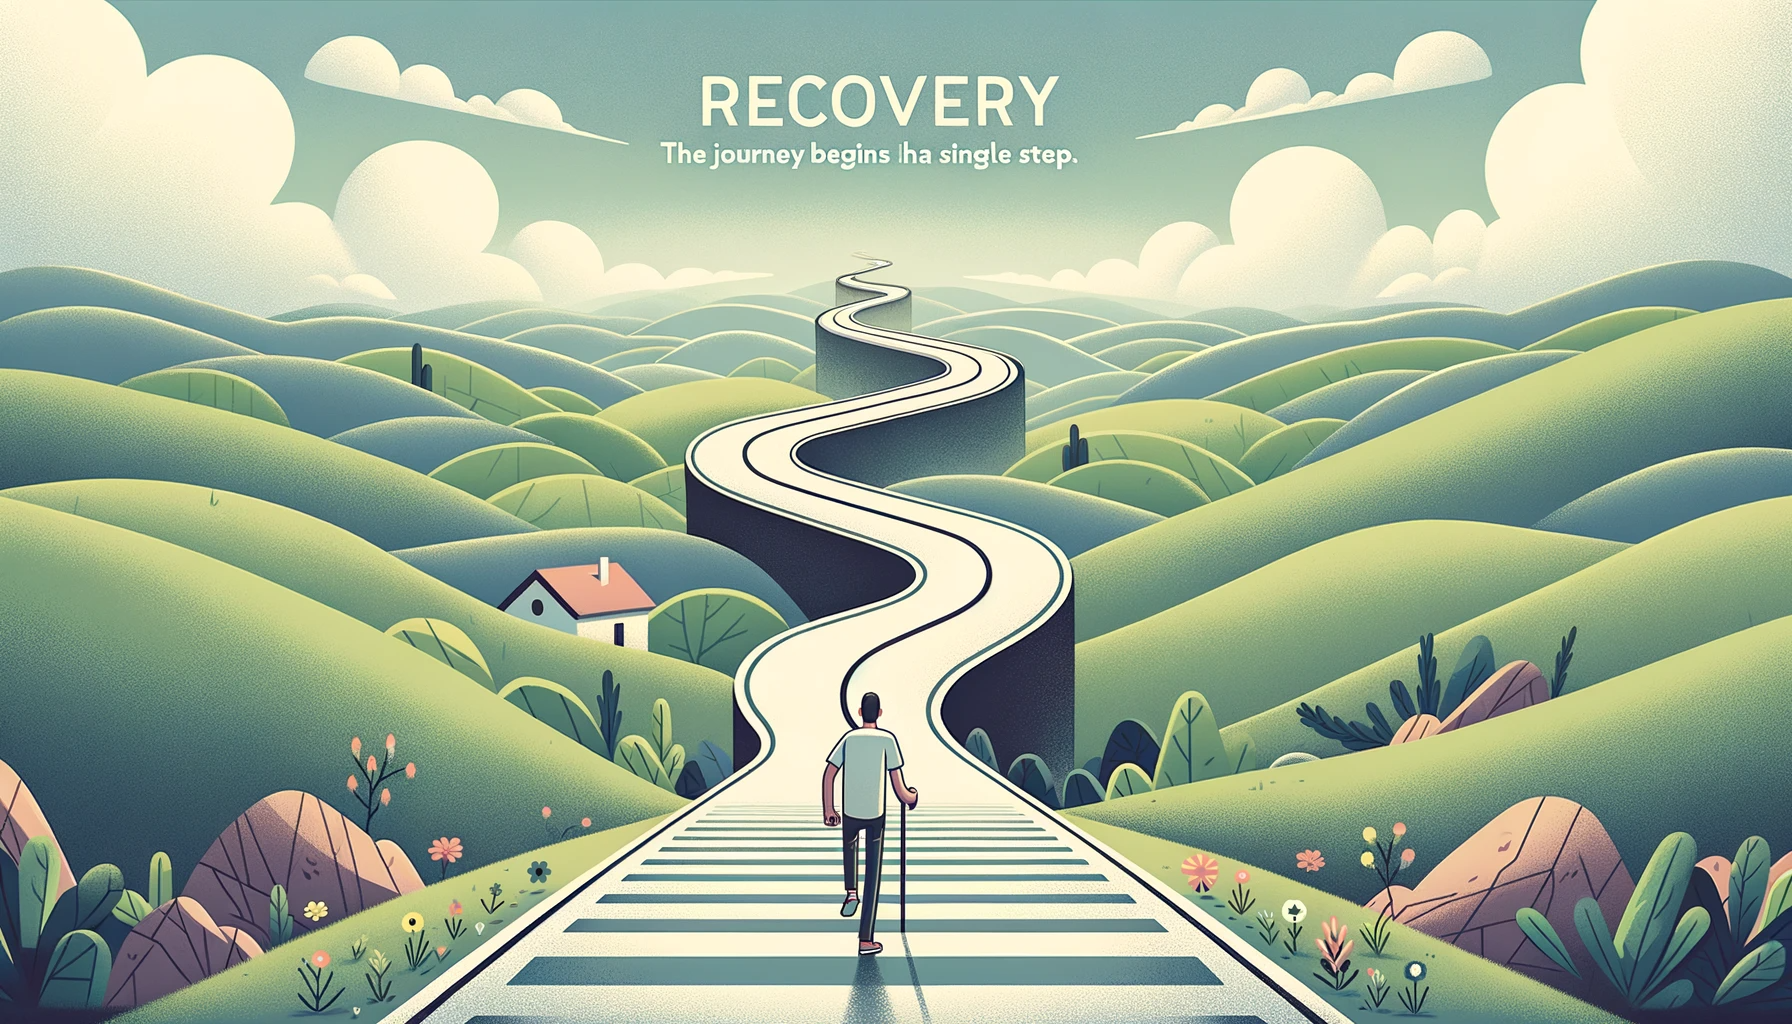 Illustration of a person starting their recovery journey in Saskatoon, Saskatchewan - Scientific research and evidence-based approaches supporting drug and alcohol treatment in Saskatoon, Saskatchewan.